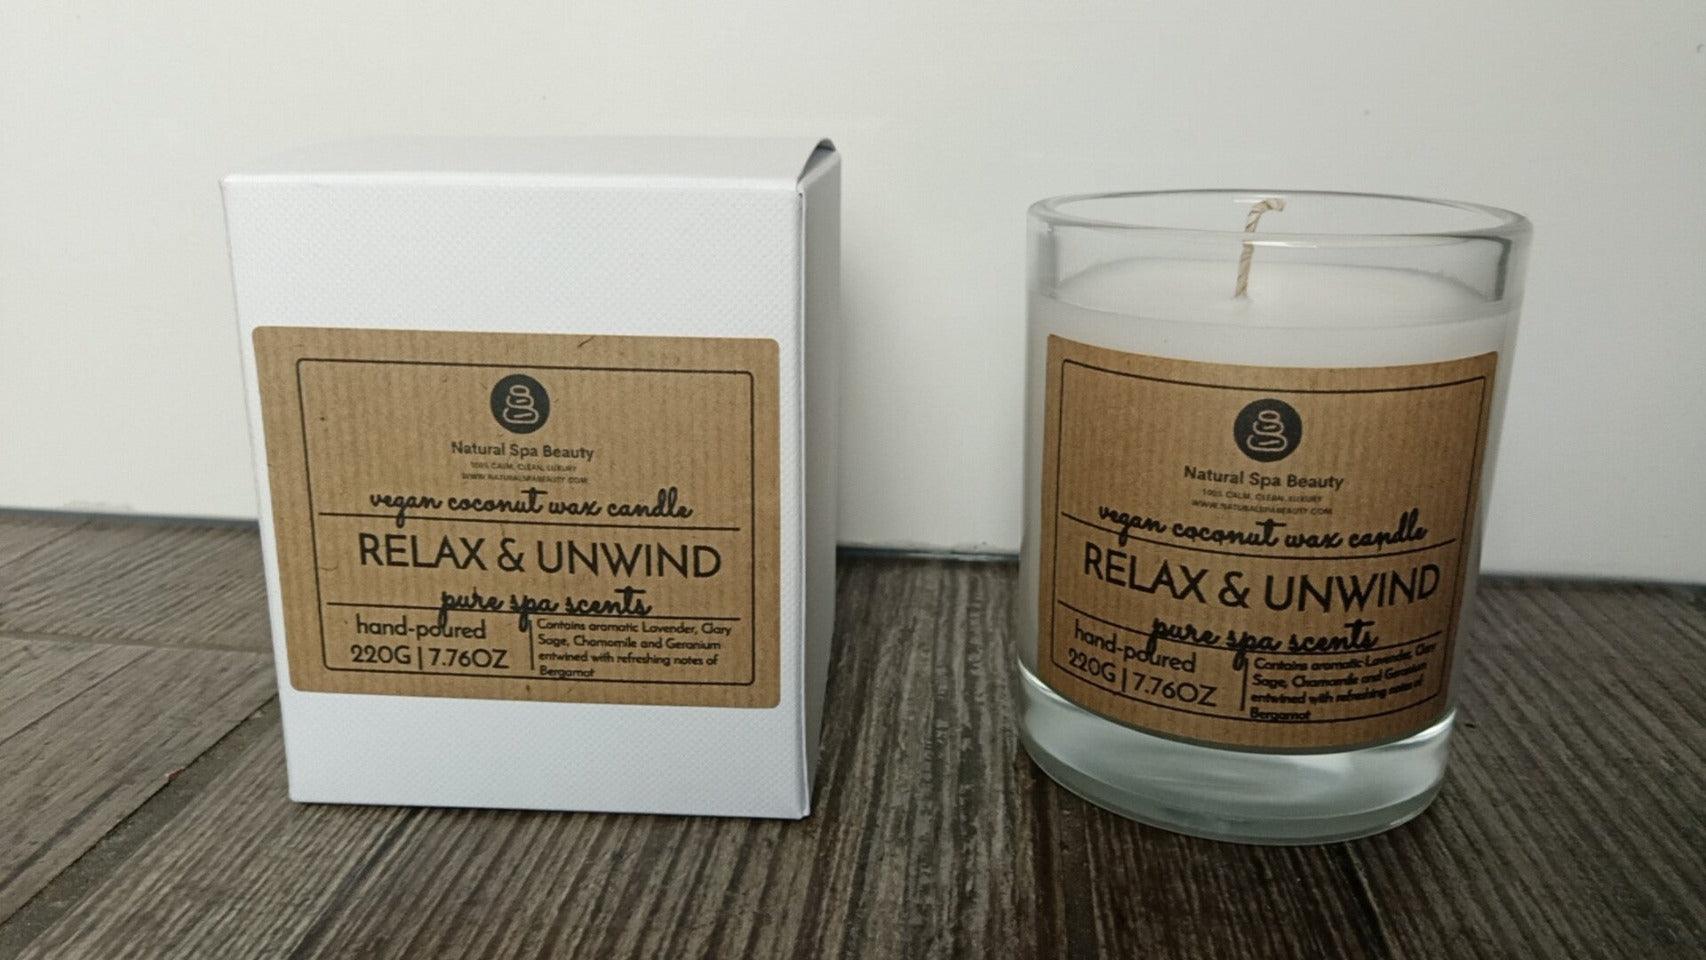 PURE SPA SCENTS - Relax & Unwind Candle - Natural Spa Beauty